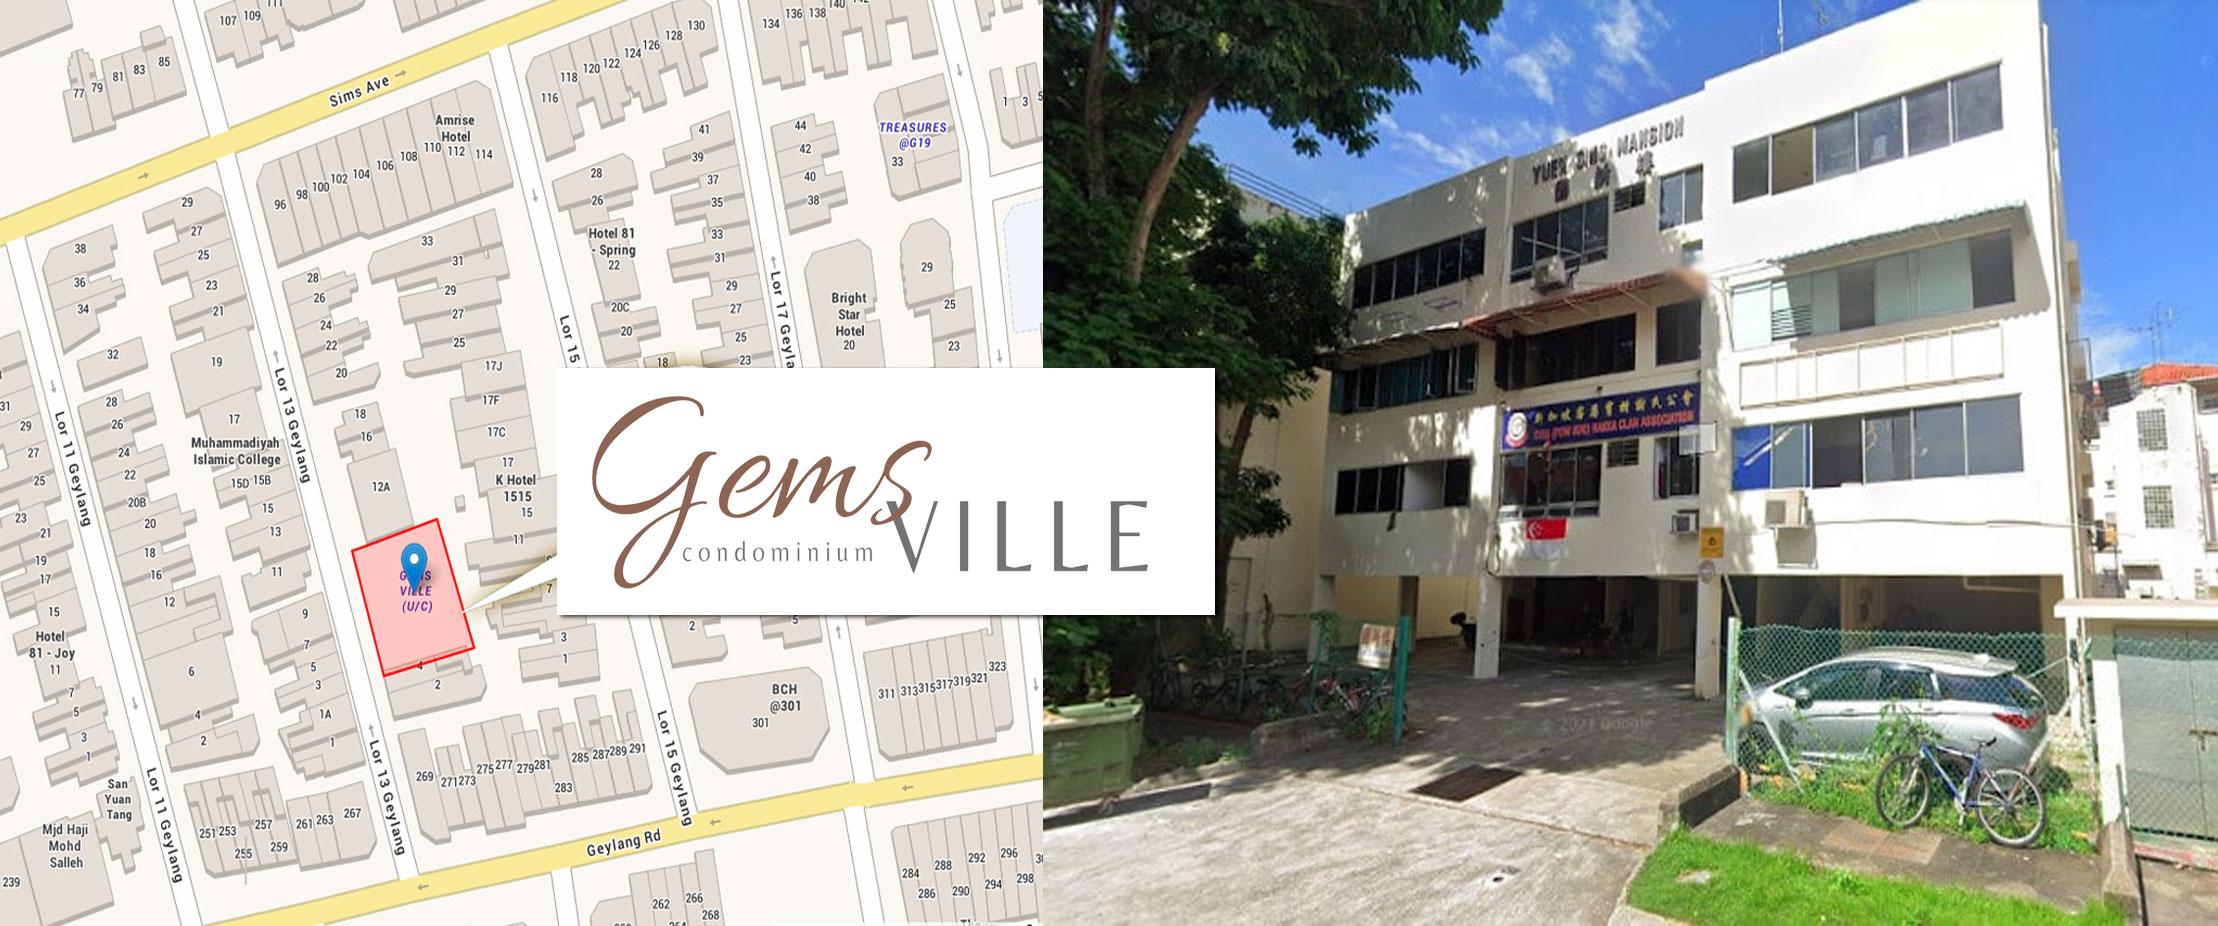 Gems Ville ( formerly Yuen Sing Mansions) is a freehold apartment at Lorong 13 Geylang, District 14